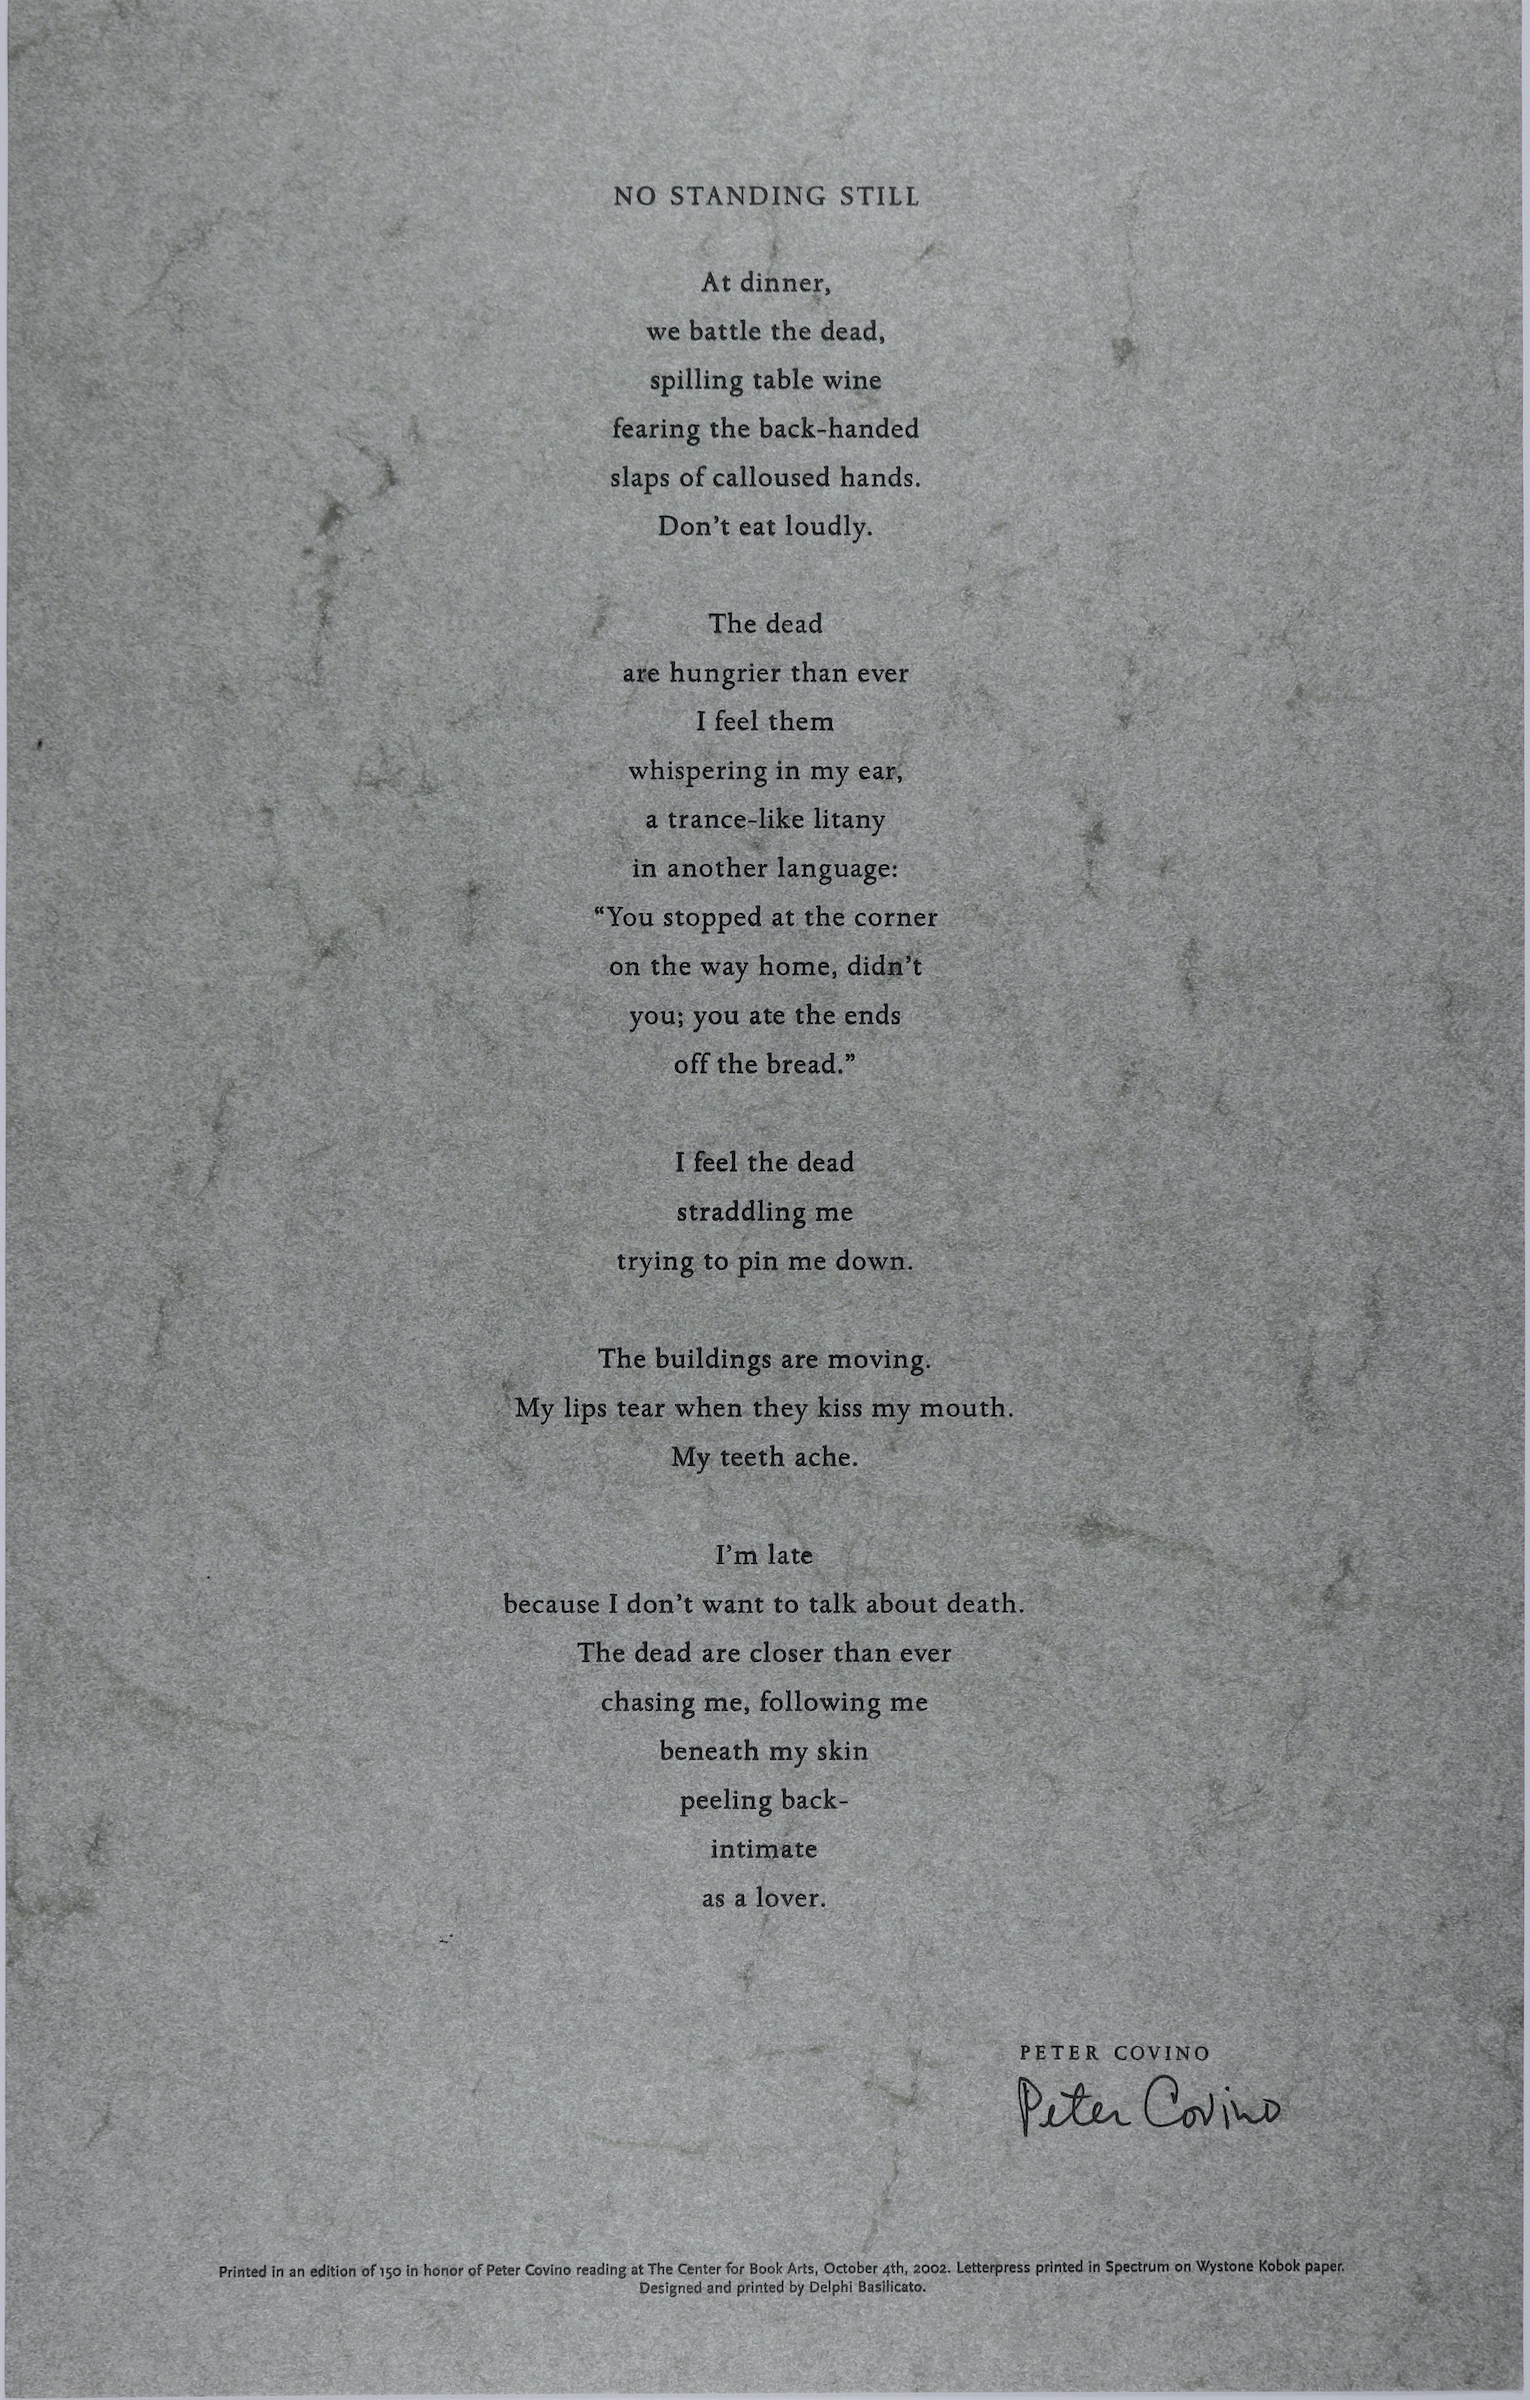 This broadside is long and vertically rectangular in size, with a stone gray color background. The title is located directly above, near the edge of, the broadside. The text and title are right in the middle of the paper and stretch down to the bottom of the page, both are black in color. The text is formatted into paragraphs, five in total.